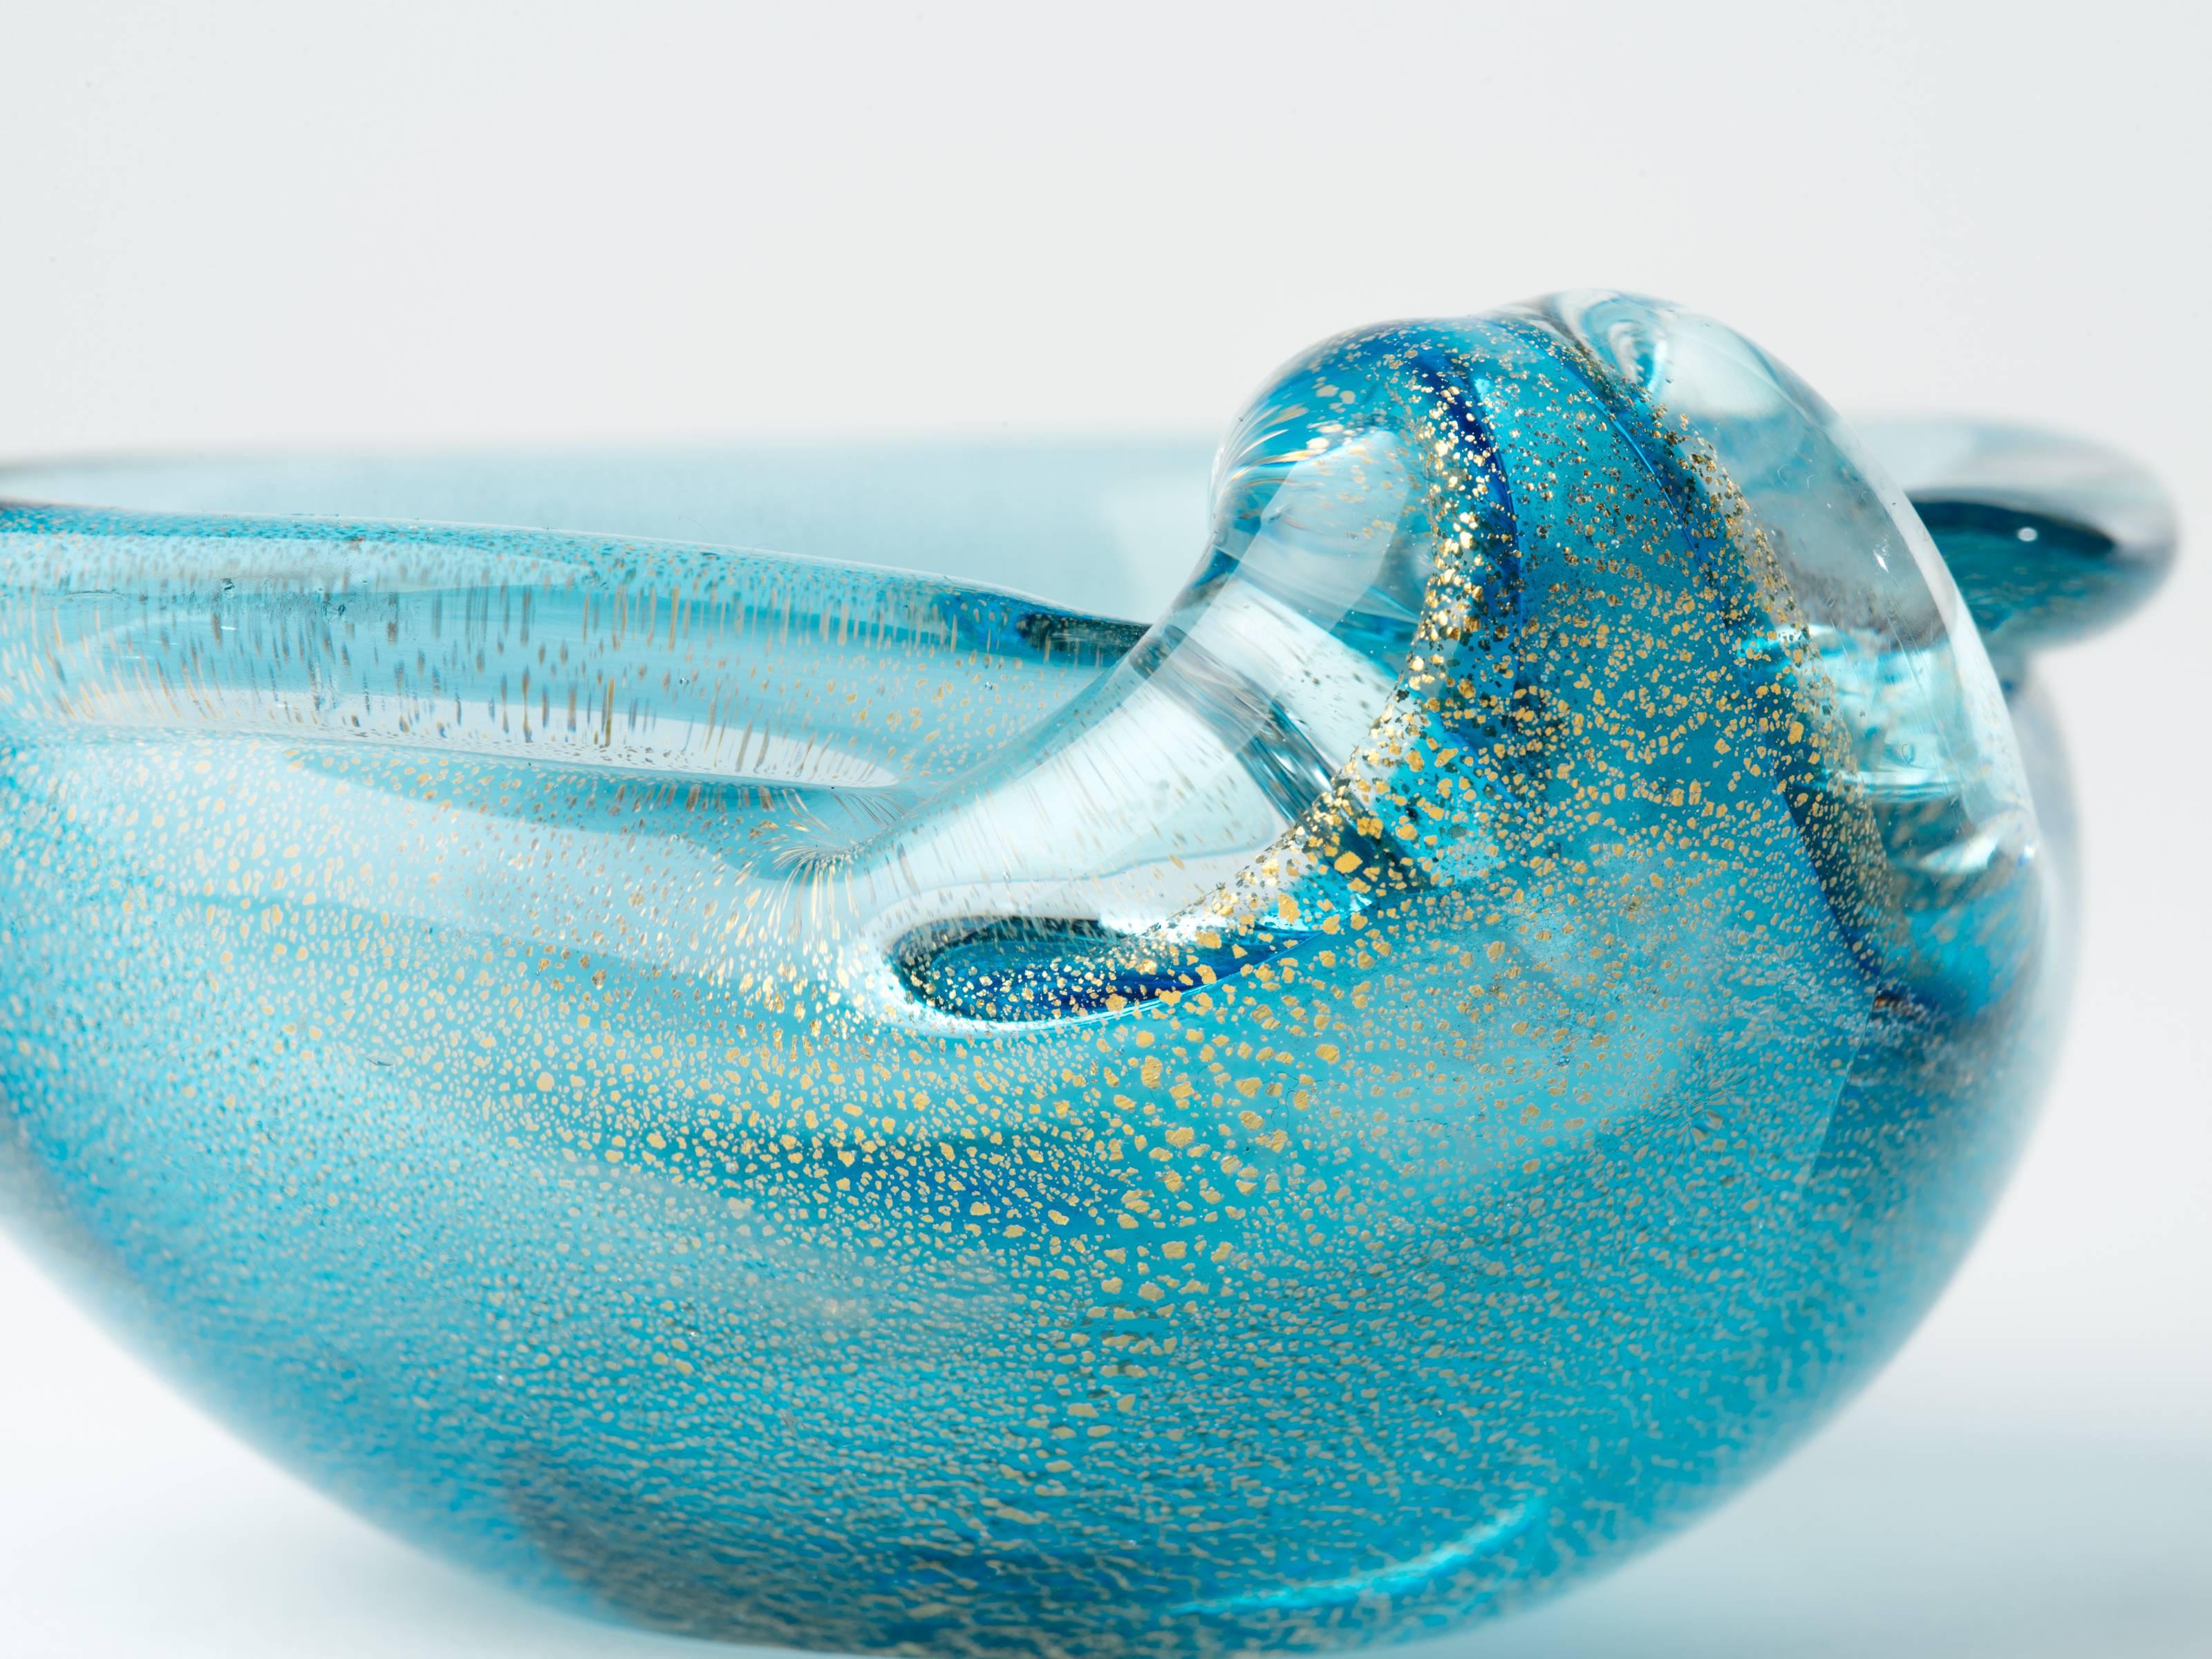 Mid-20th Century Pair of Exquisite Aqua and Gold Murano Bowls by Alfredo Barbini